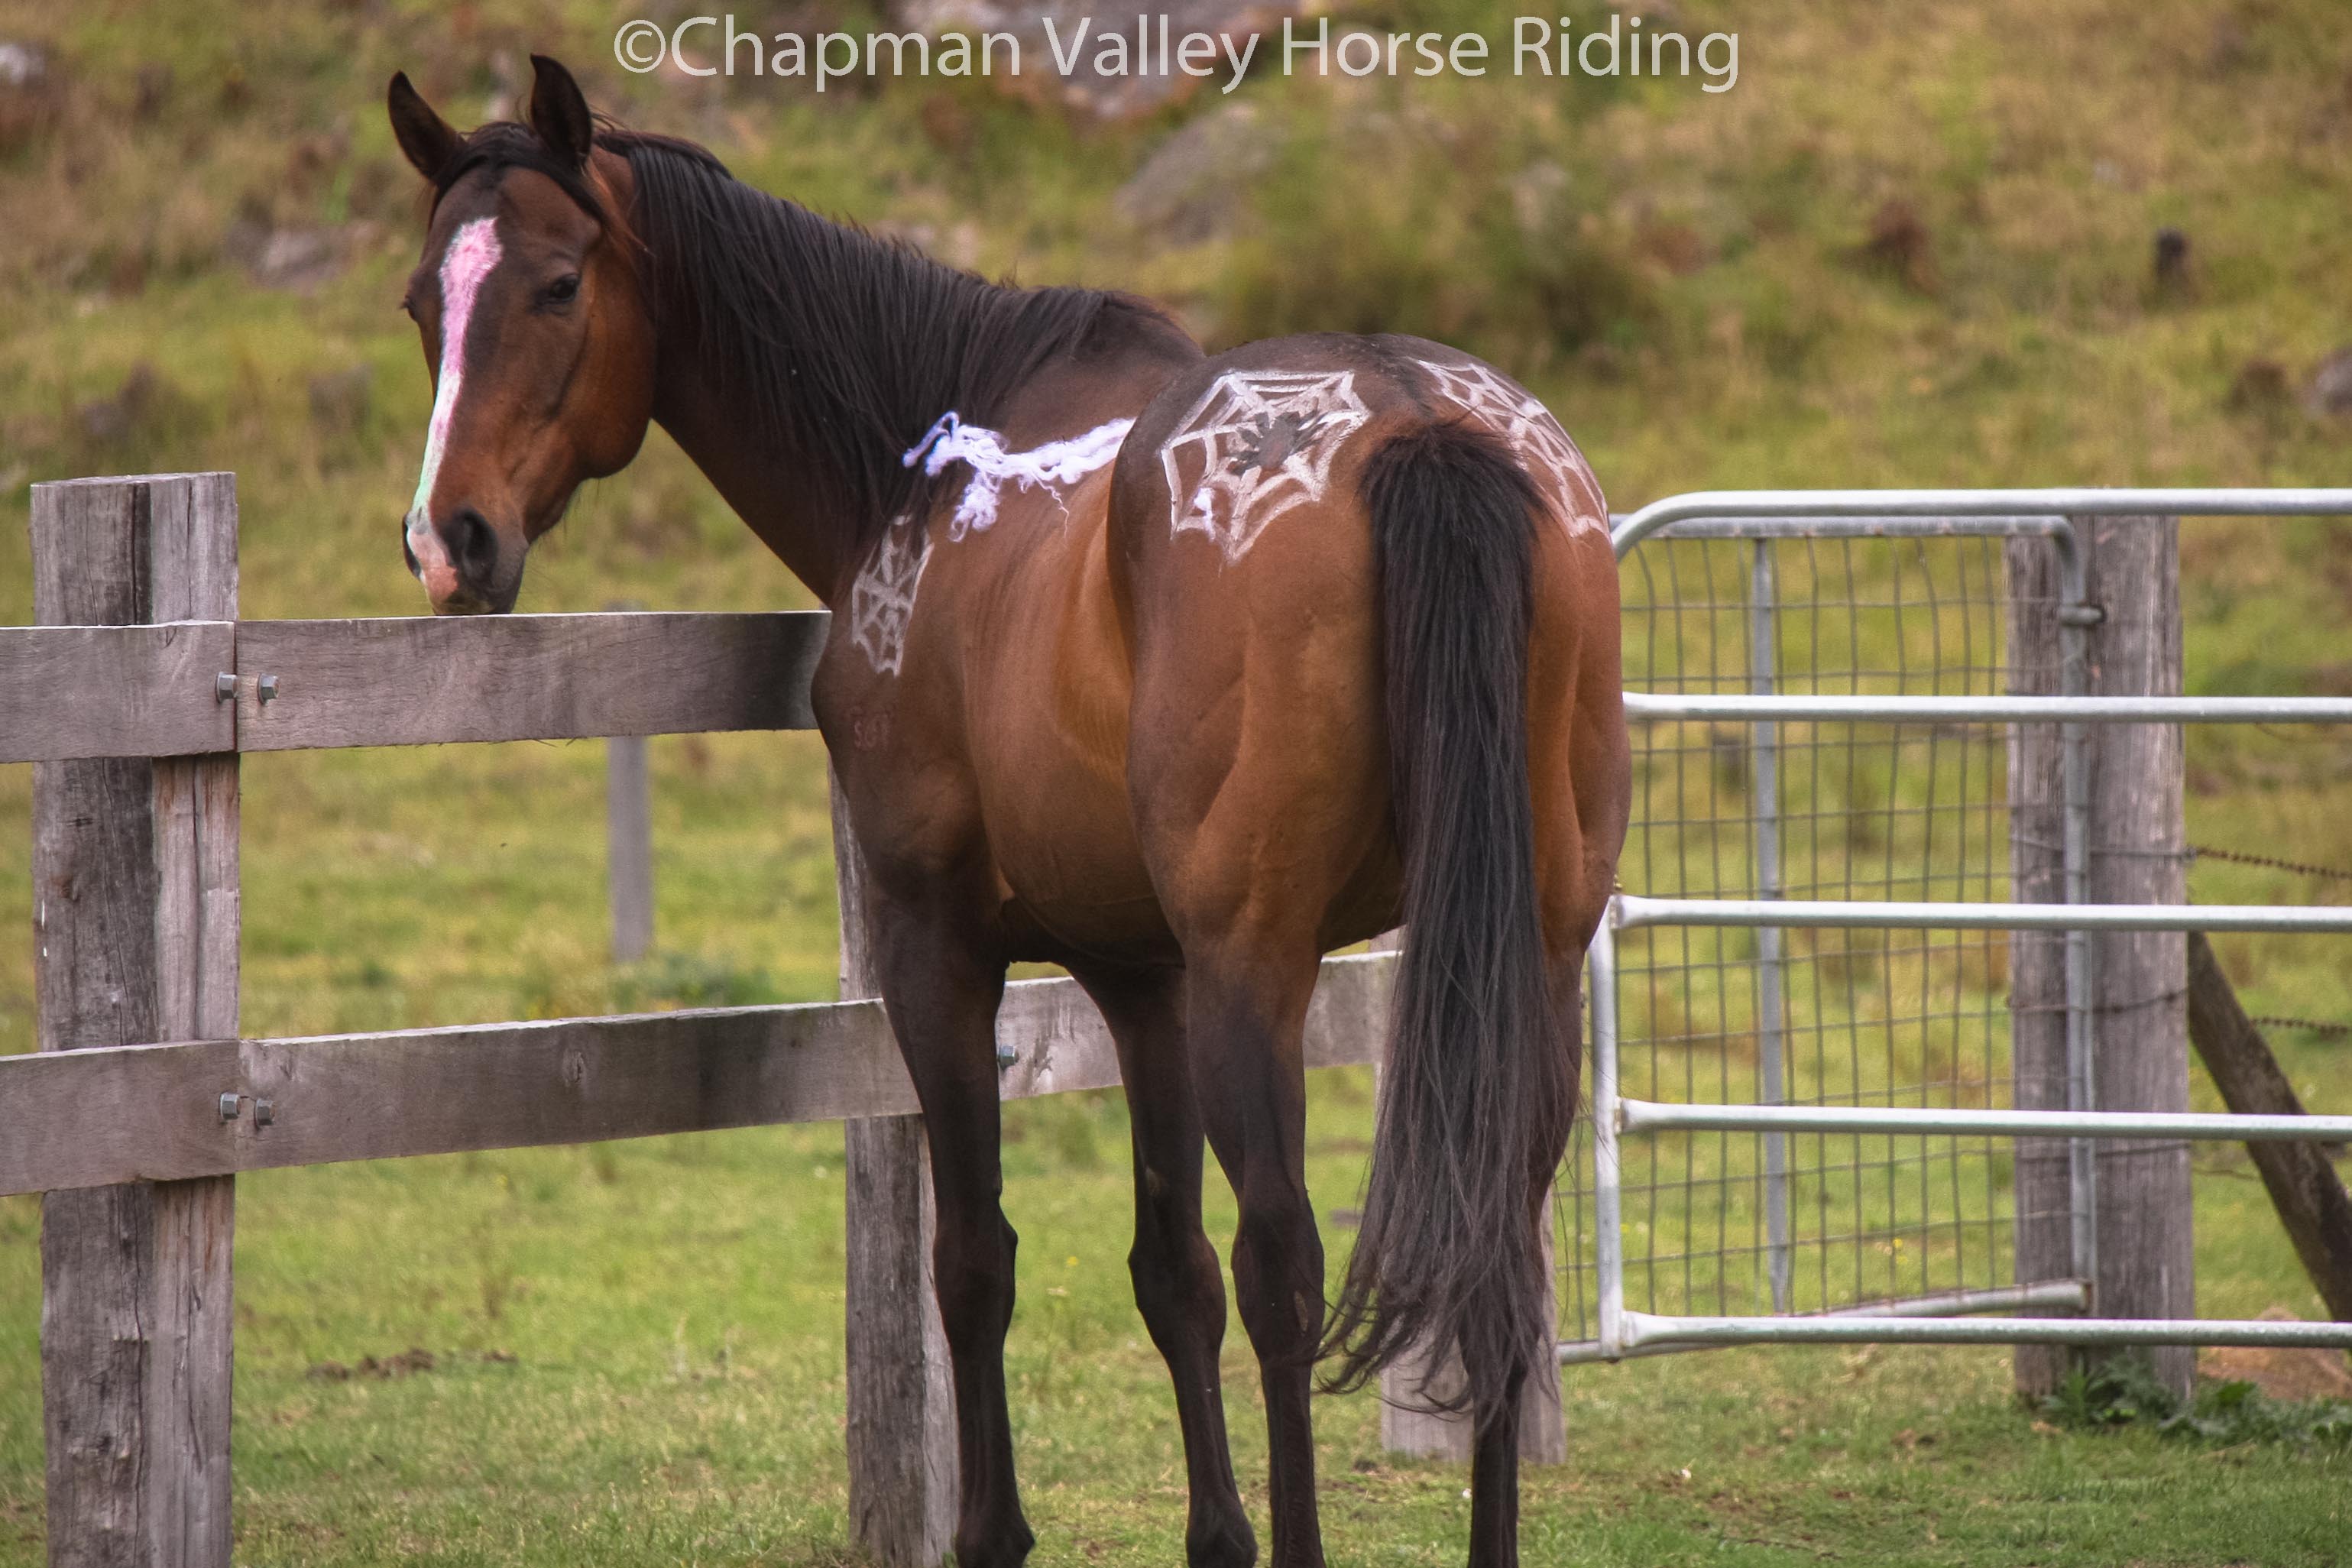 Horses at Chapman Valley Celebrate Halloween with Costumes!